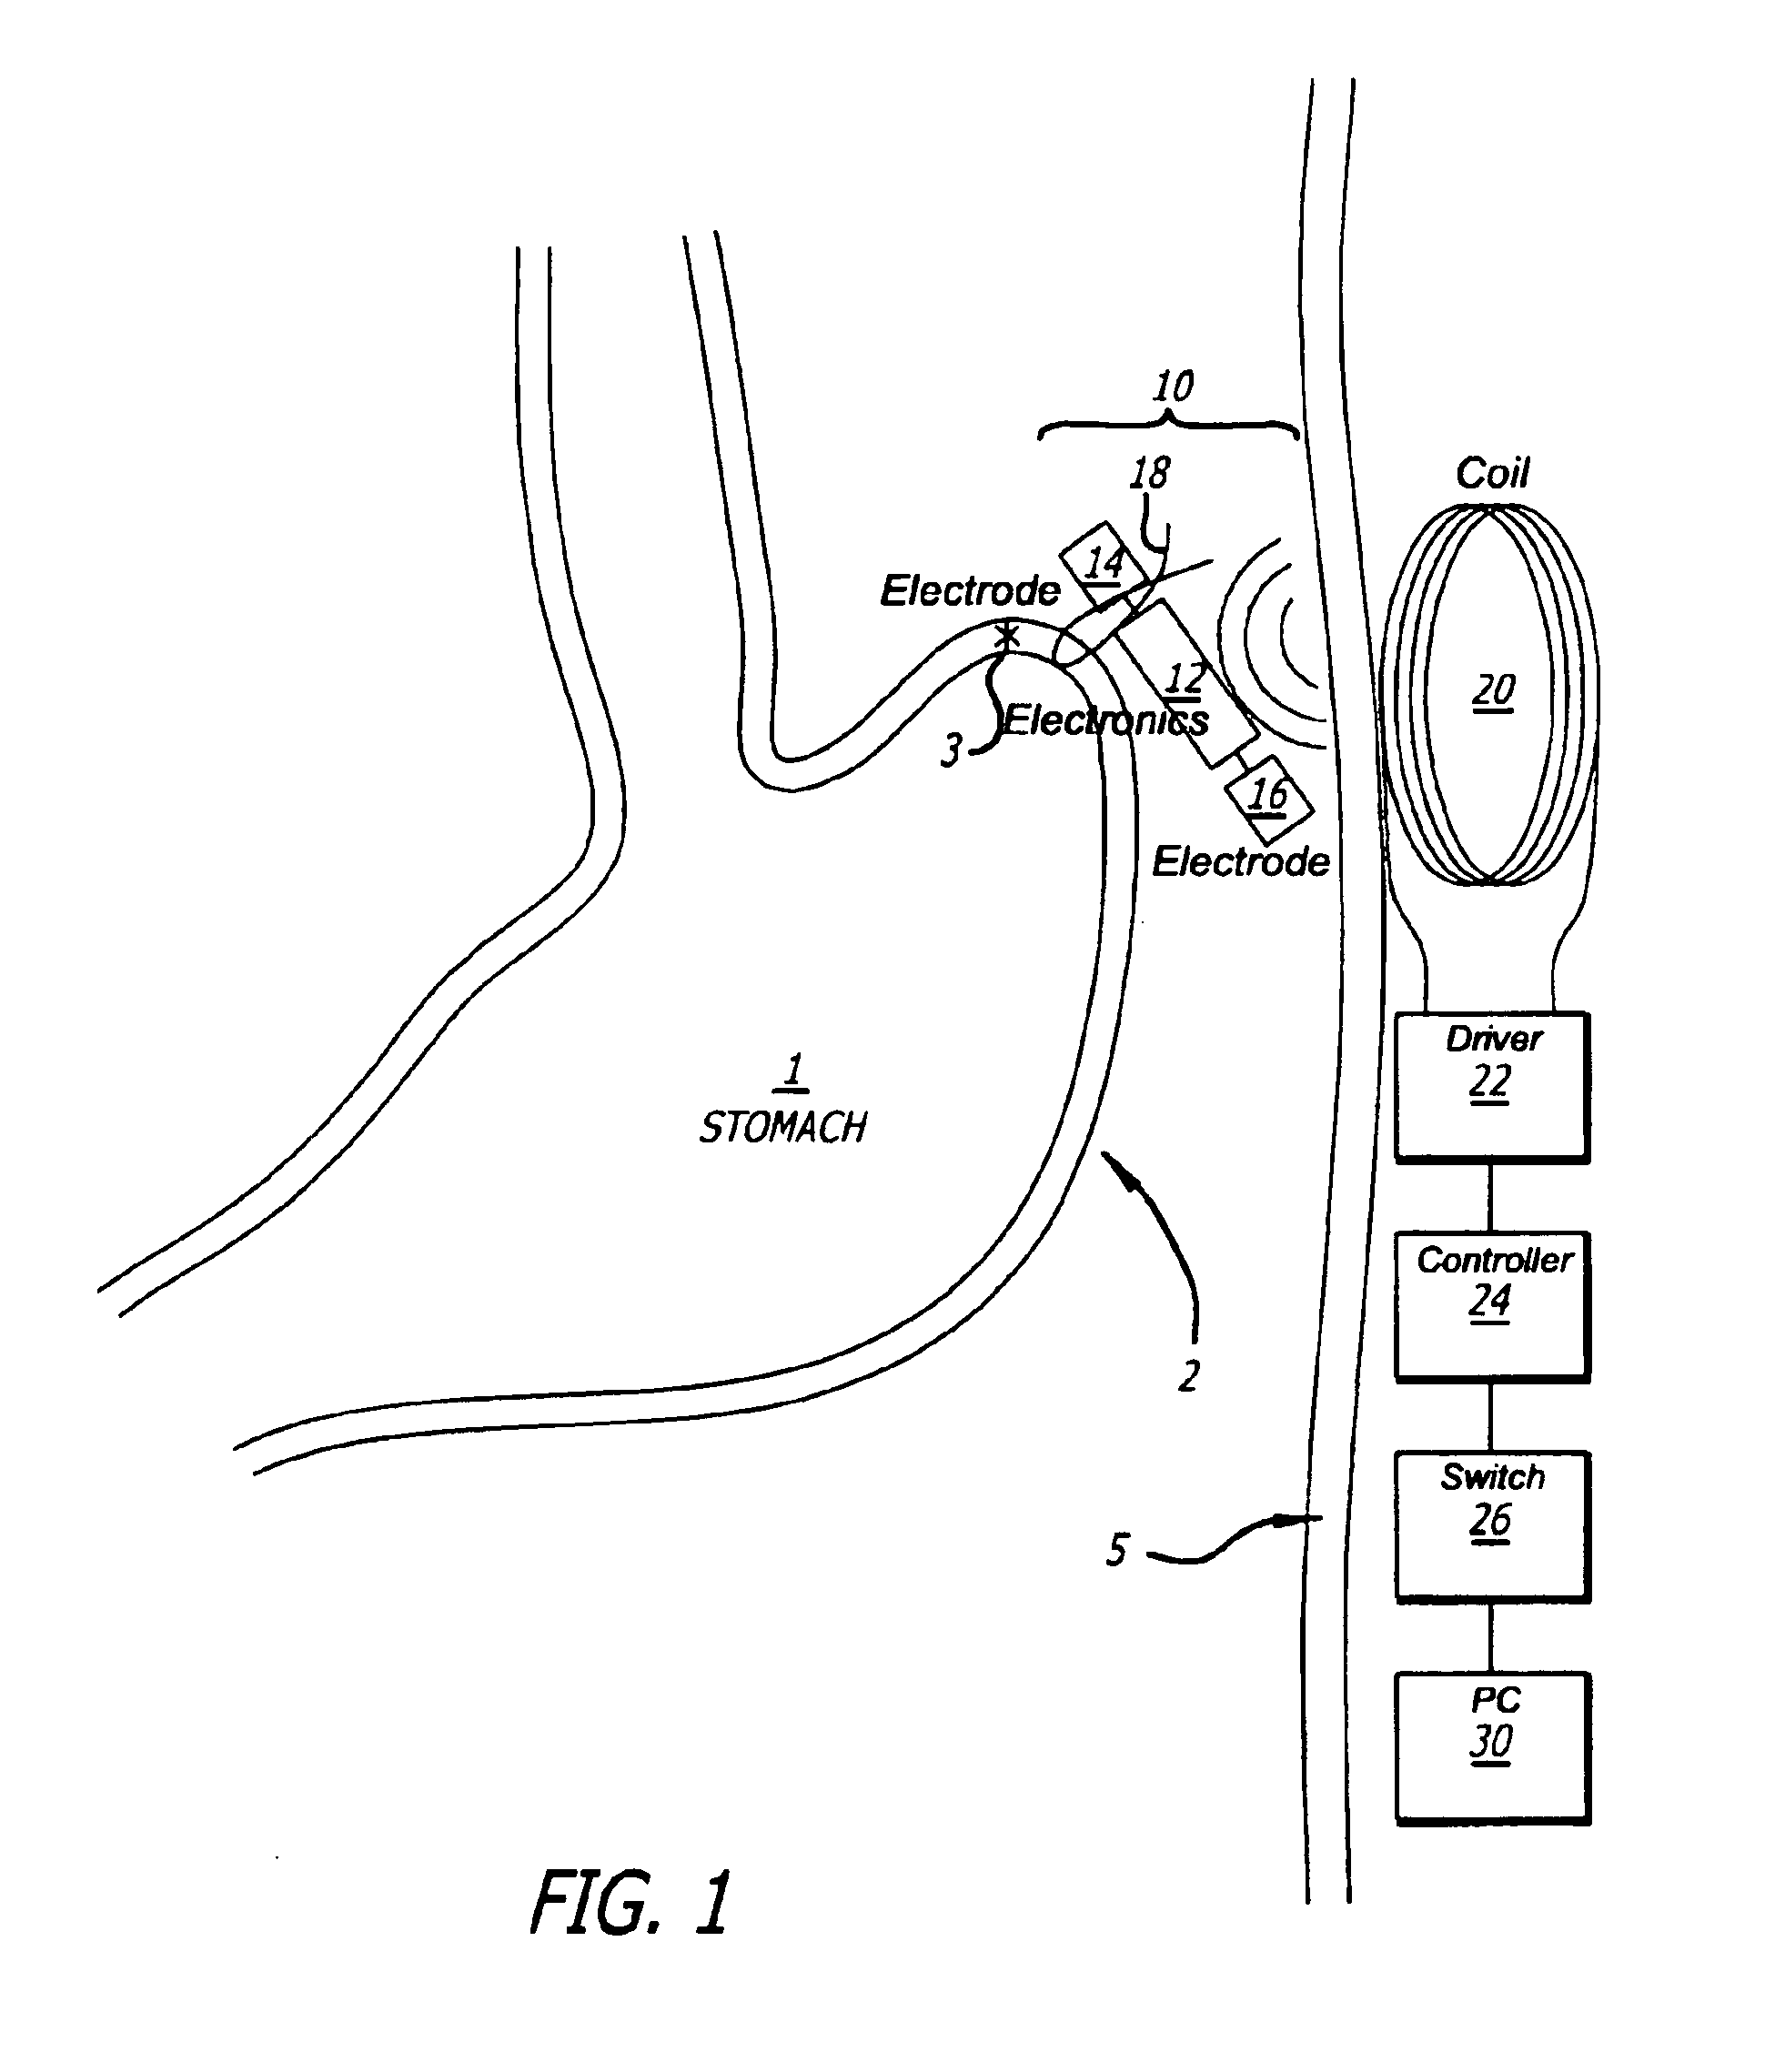 Method and apparatus to treat disorders of gastrointestinal peristalsis